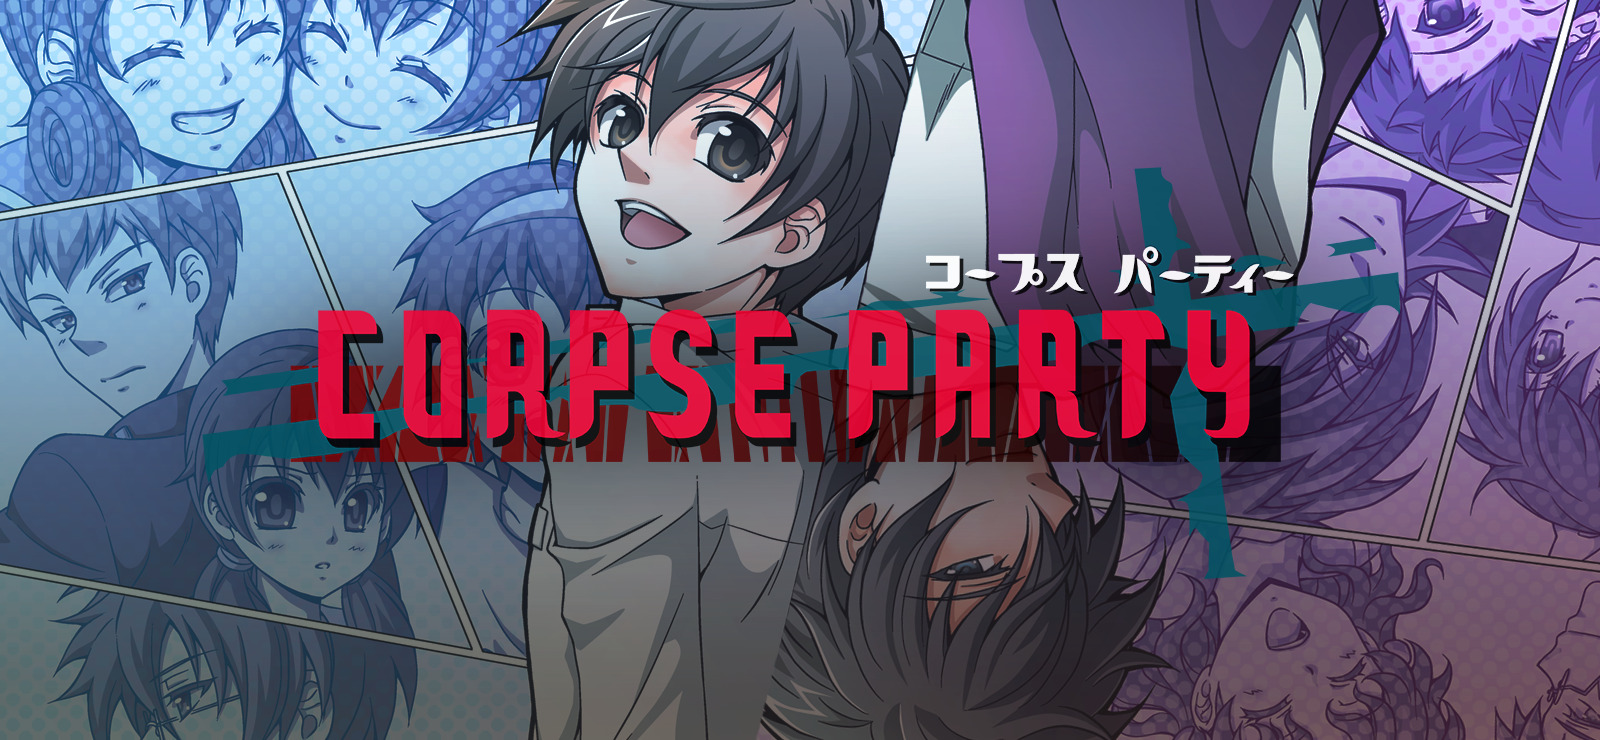 Corpse Party on 